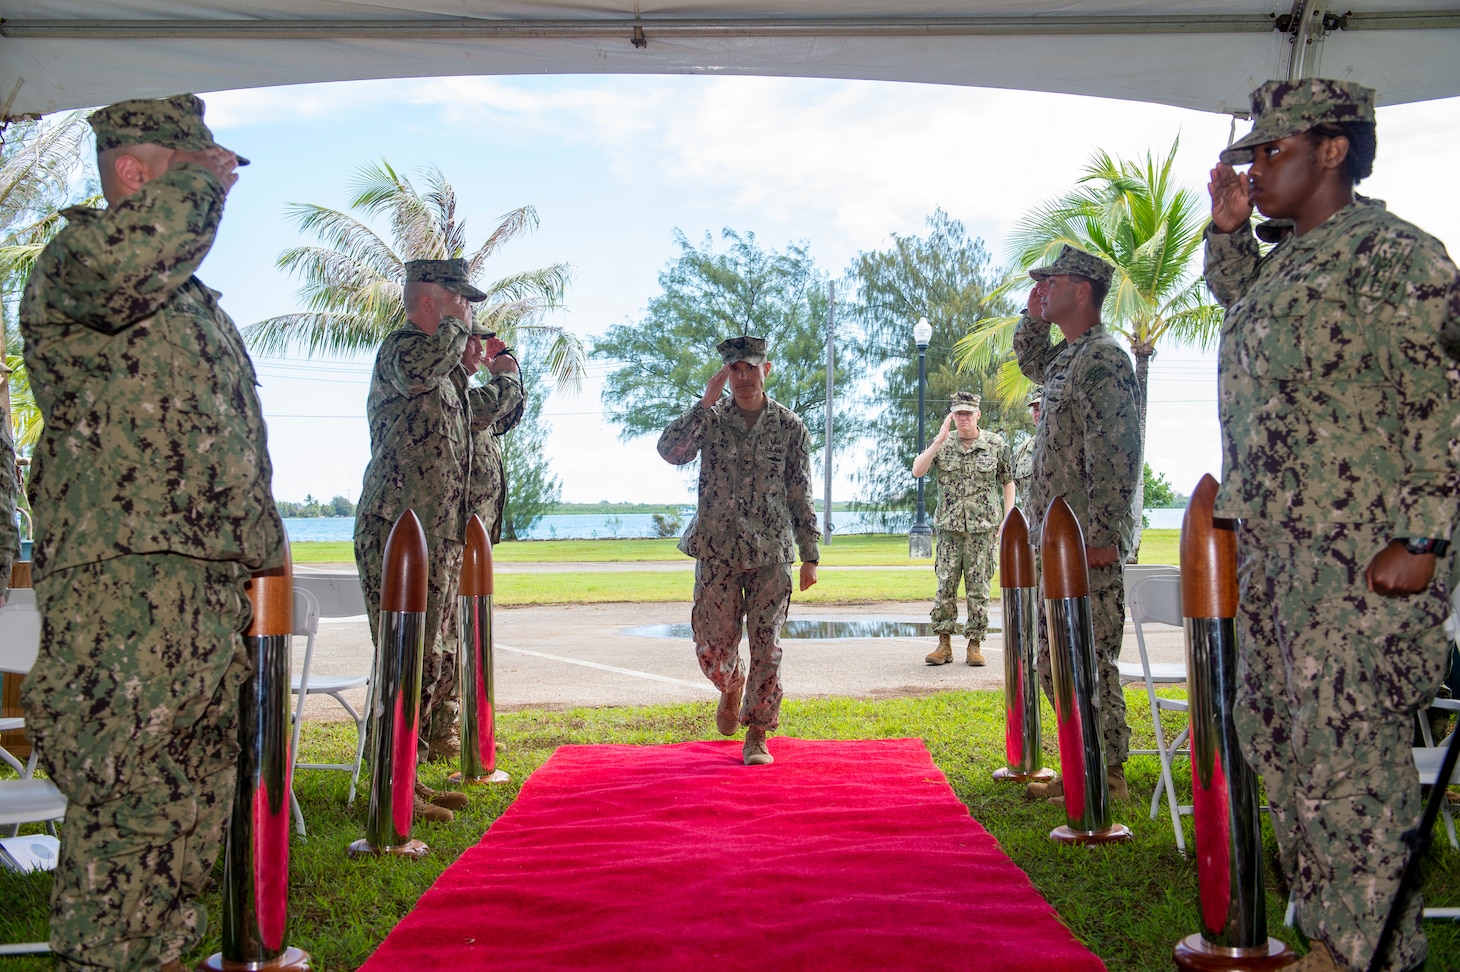 PITI, Guam (June 17, 2022) Capt. Shaun Lieb receives honors from side boys during the Commander, Task Force 75 change of command ceremony. Capt. Gareth Healy relinquished command as Commodore, CTF 75 to Lieb. CTF 75 provides expeditionary combat capabilities in the U.S. Navy's 7th Fleet area of operations and is capable of providing the fleet with diverse expeditionary warfighting capabilities that are combat-ready and able to deploy anywhere in U.S. 7th Fleet in response to any contingency. The Navy's expeditionary forces exist first and foremost to support the fleet's warfighting operations and are the Navy's sea-to-shore interface. (U.S. Navy photo by Mass Communication Specialist 1st Class Billy Ho)